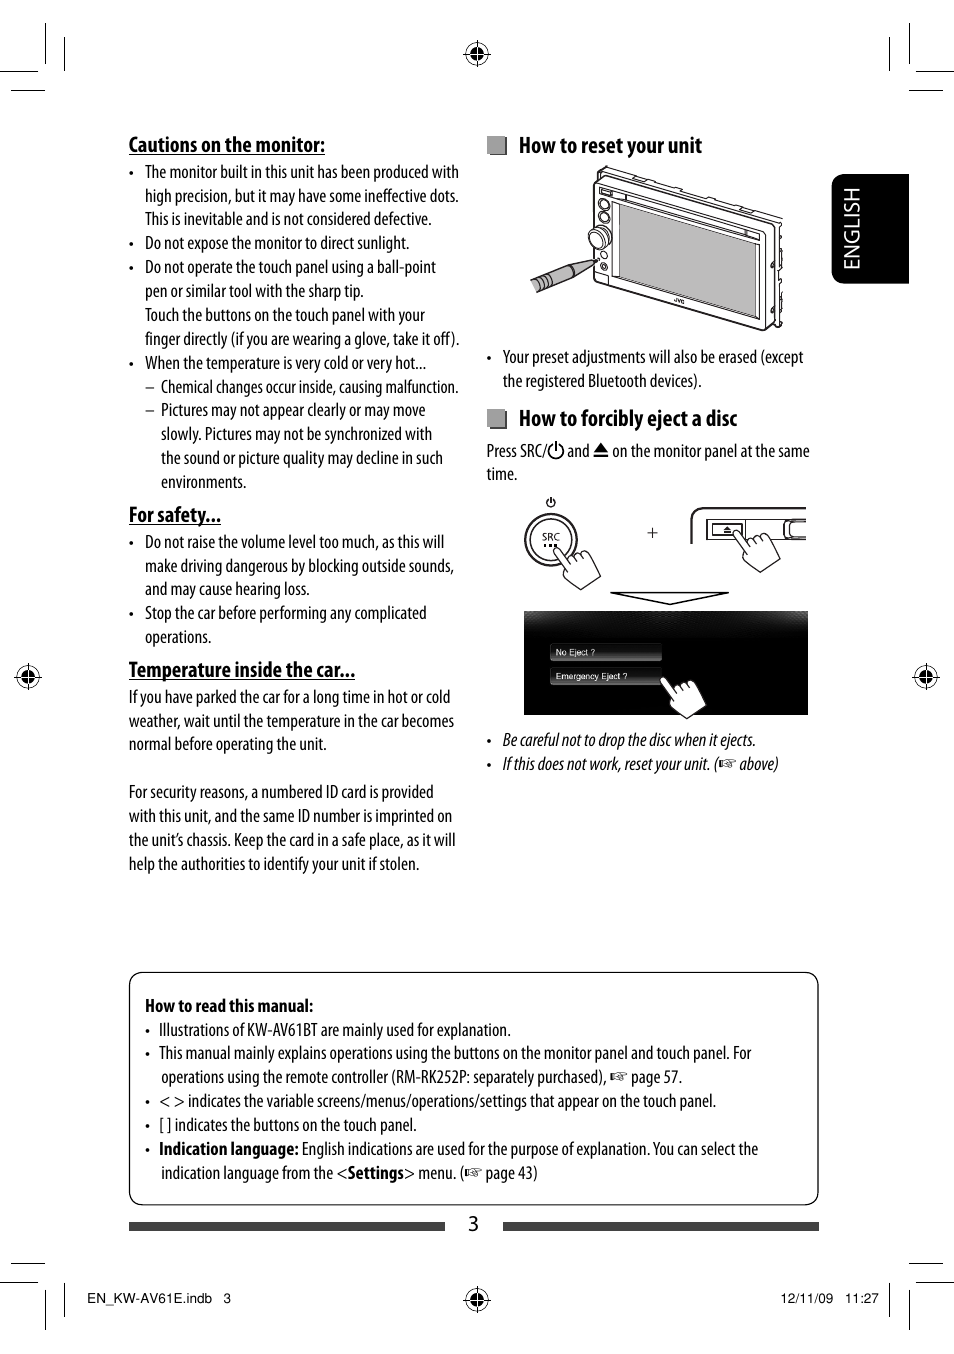 How to reset your unit, How to forcibly eject a disc | JVC KW-AV61BT User  Manual | Page 3 / 277 | Original mode